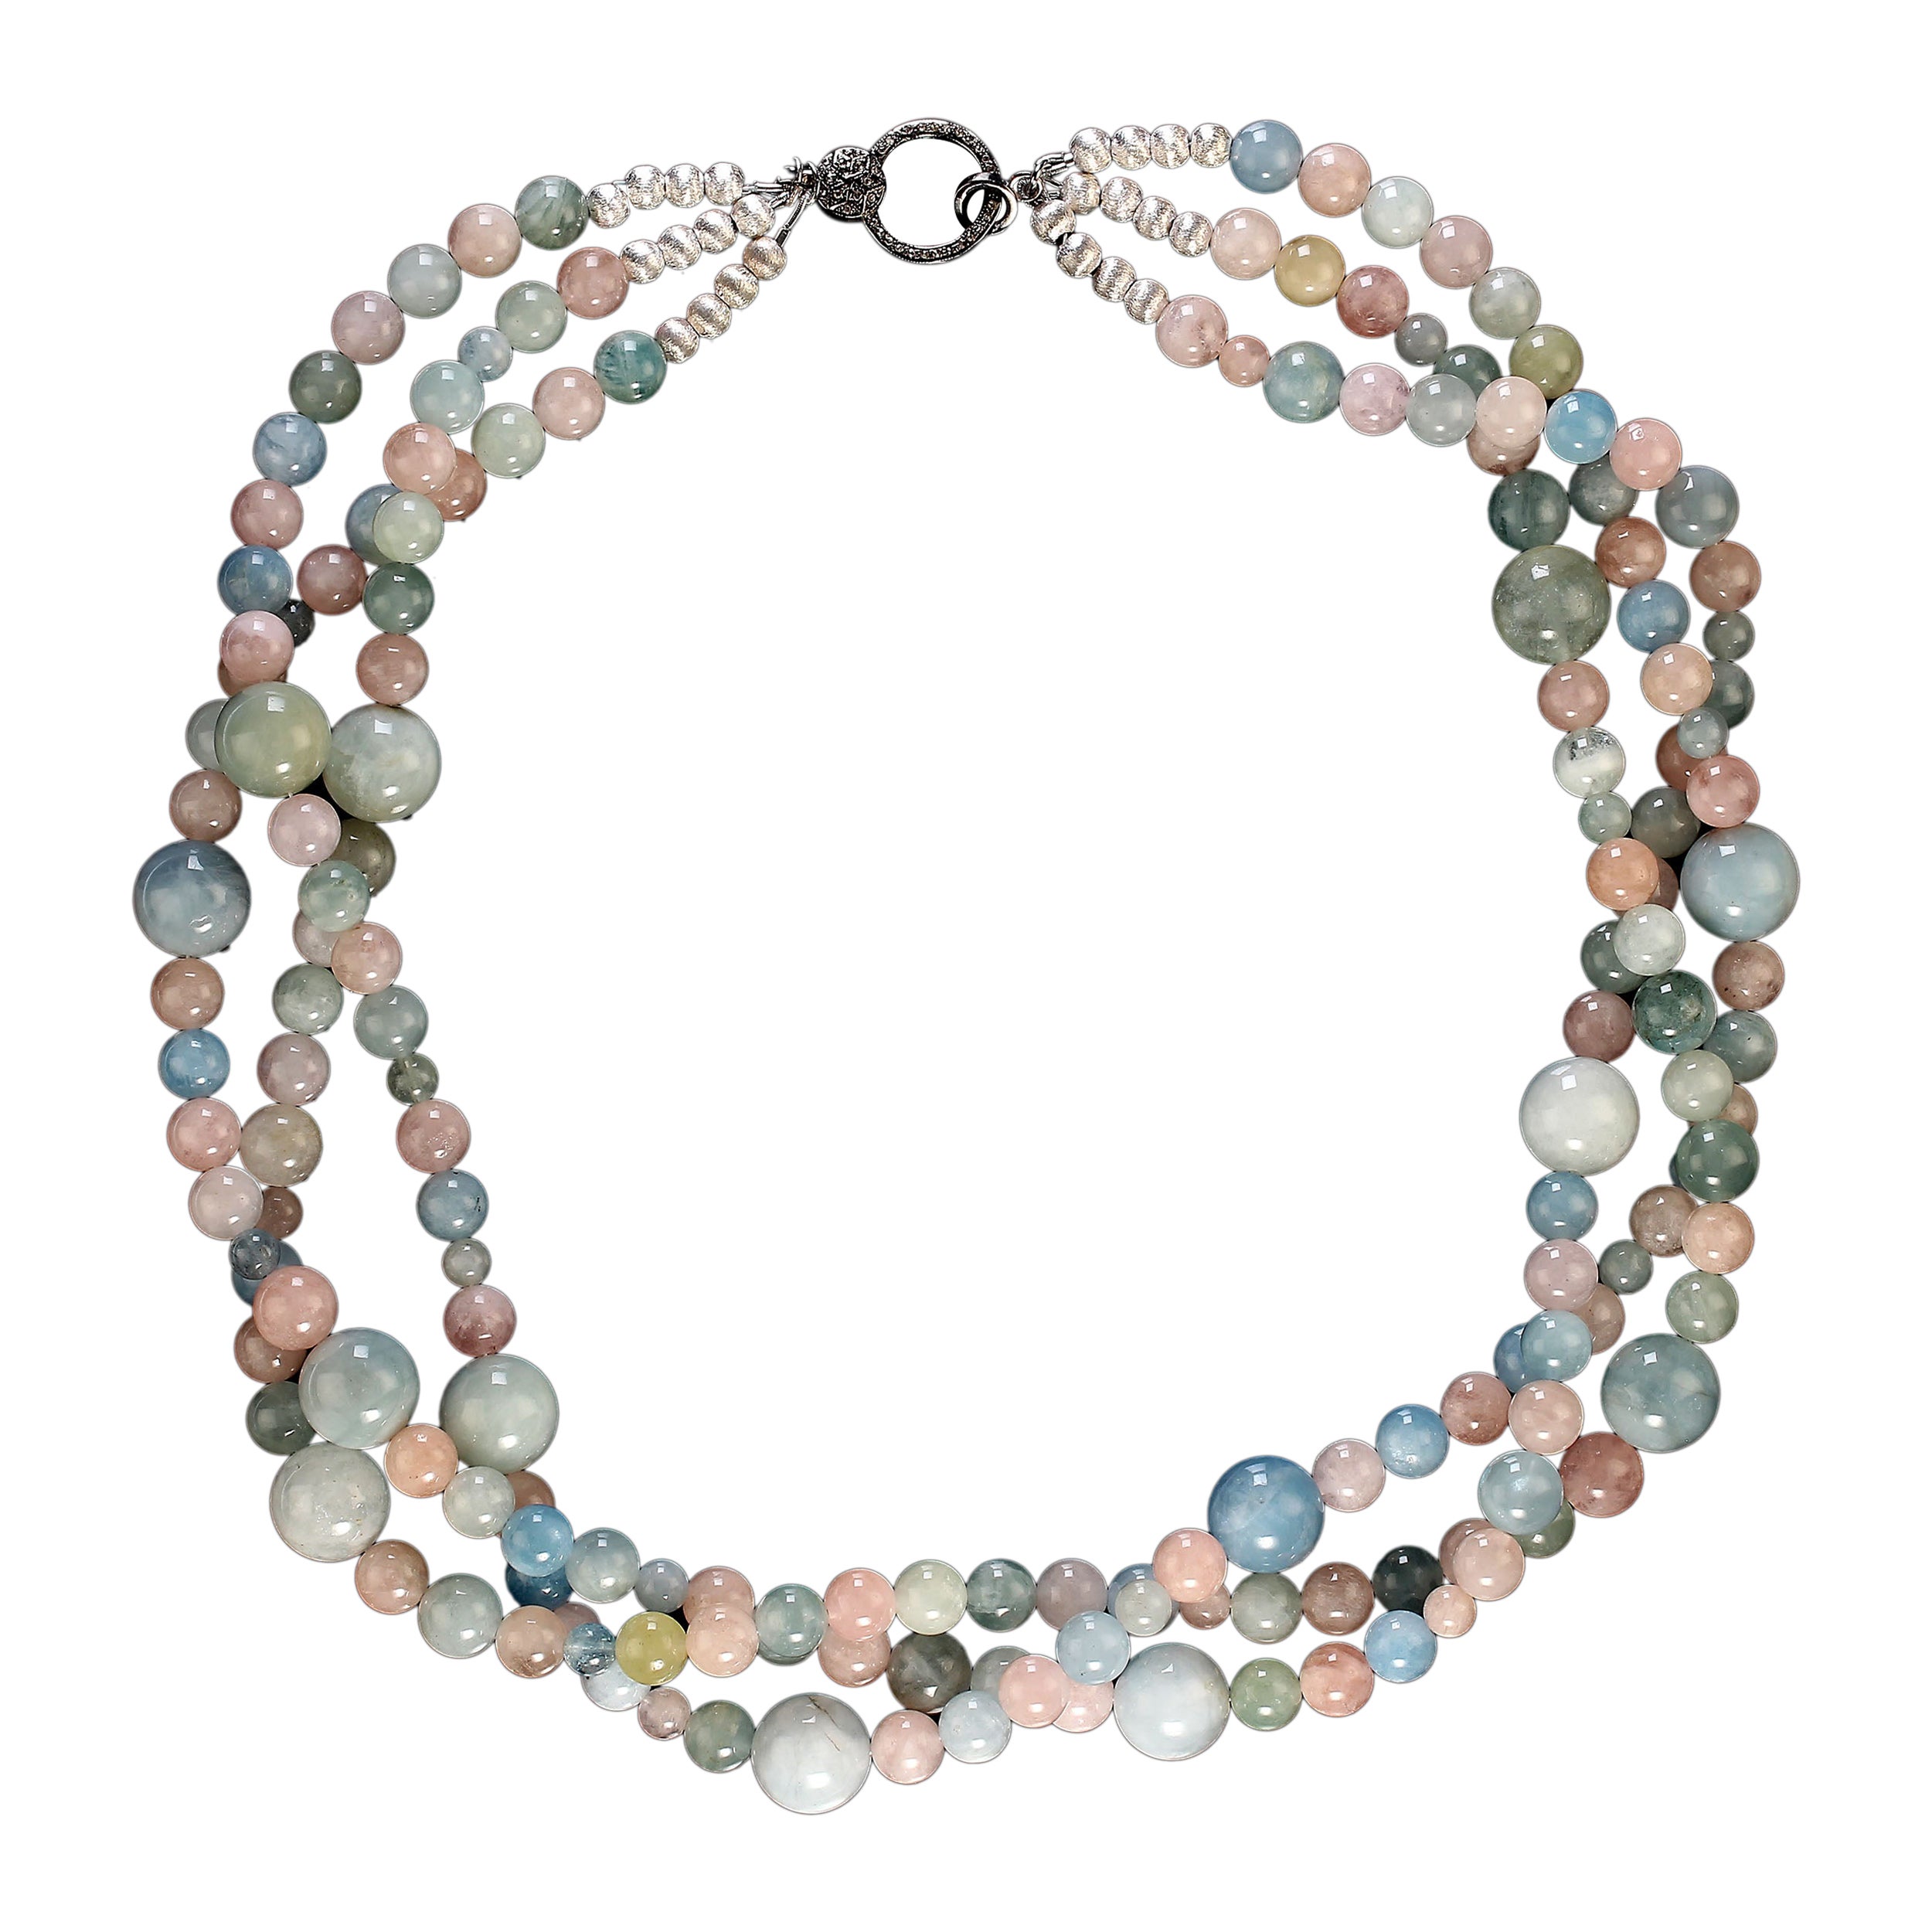 Artisan AJD 23 Inch Three Strand Multi Color Beryl Necklace in Pink, Blue and Green